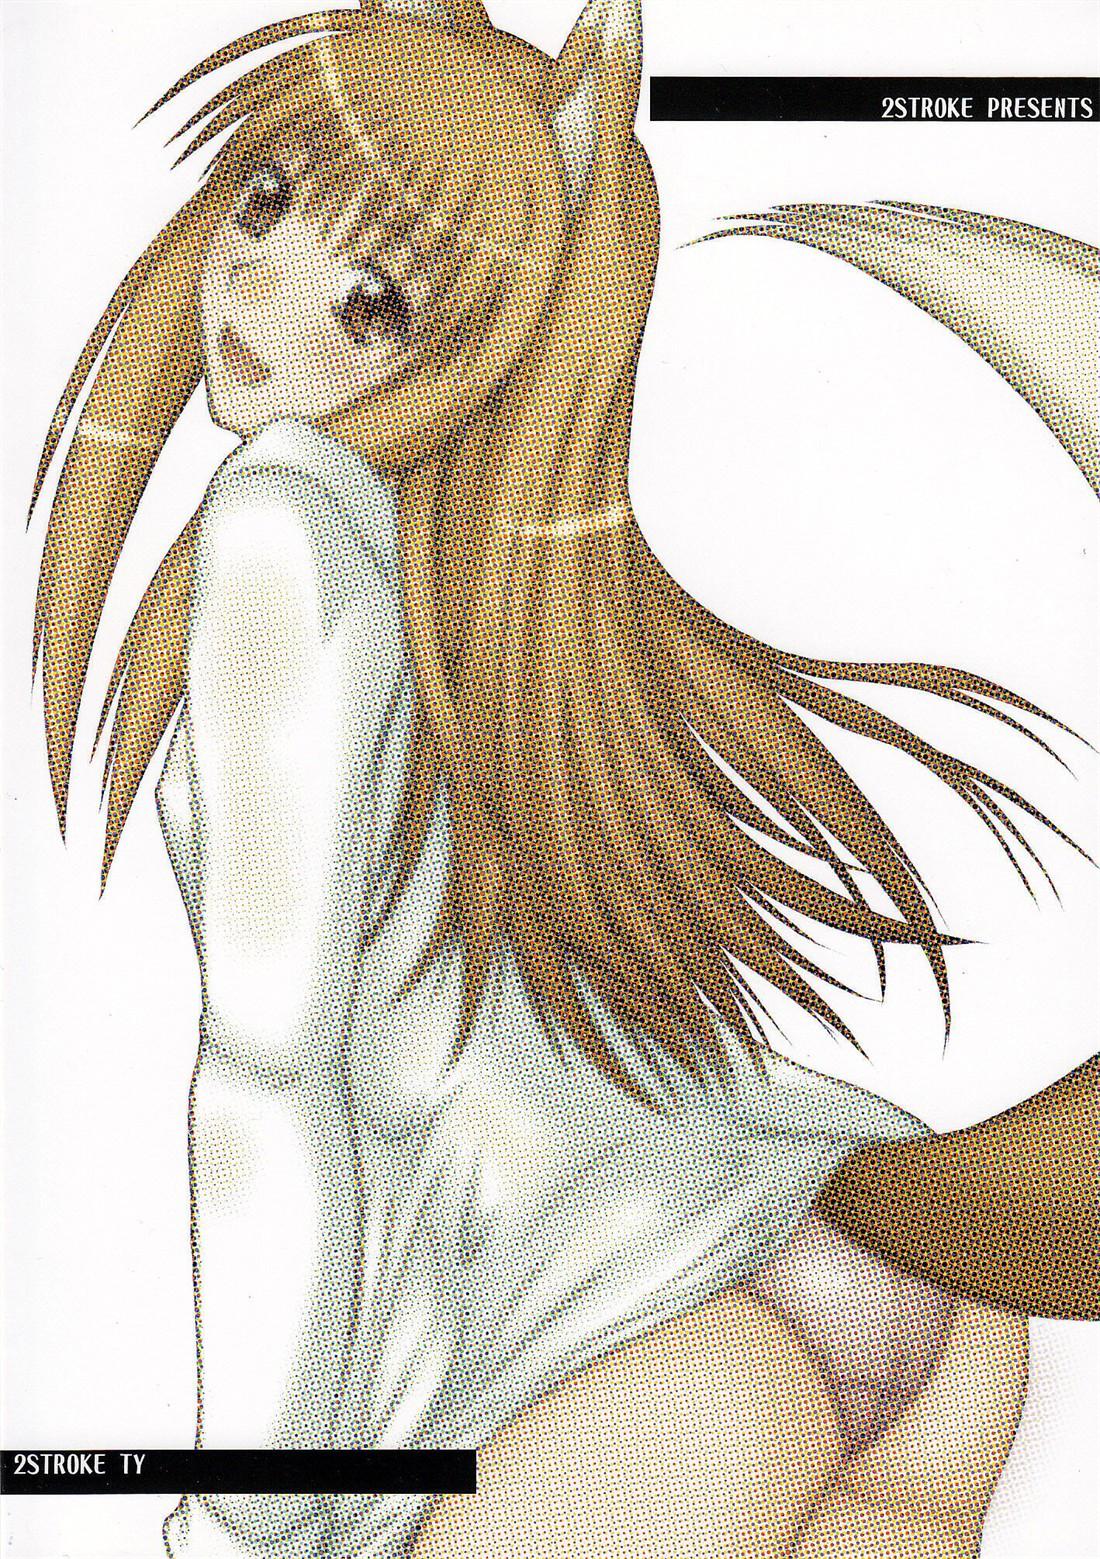 Cojiendo 2Stroke TY - Spice and wolf Stepsister - Page 26